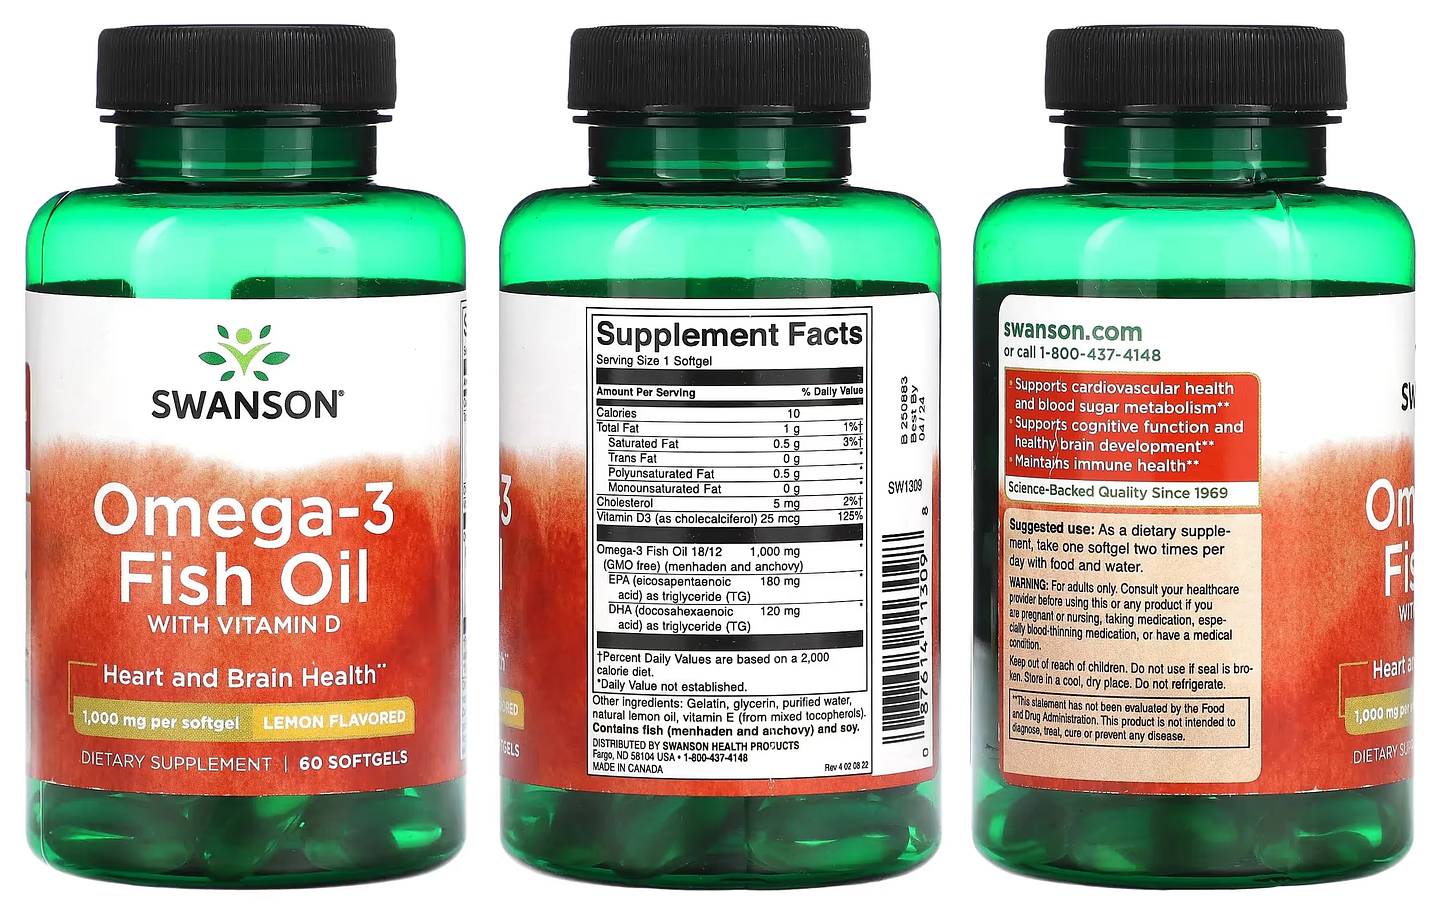 Swanson, Omega-3 Fish Oil with Vitamin D packaging